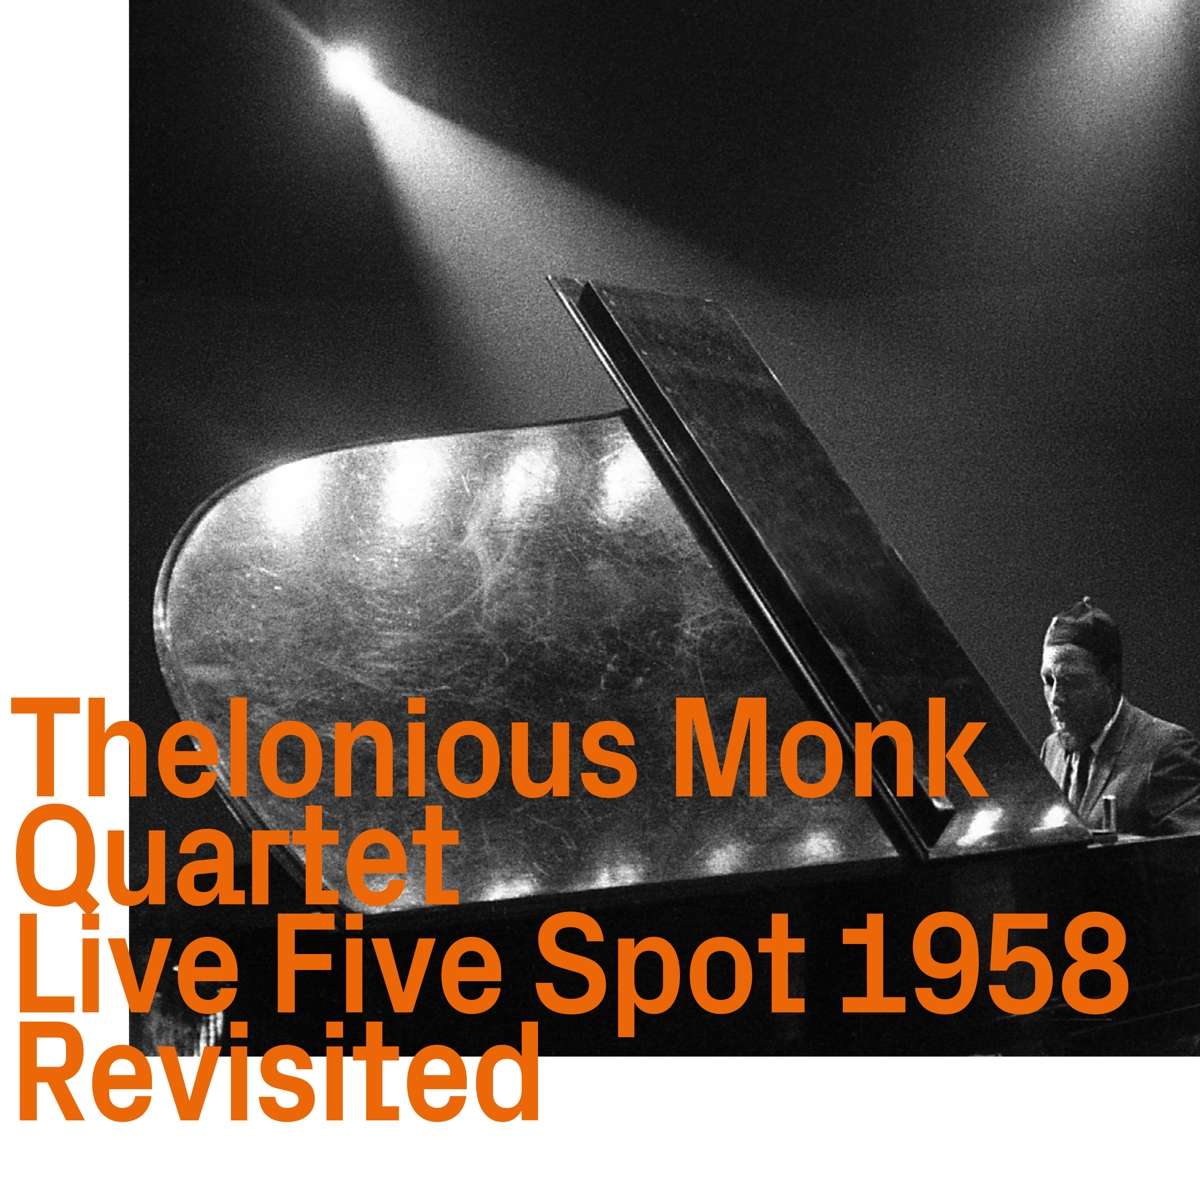 Thelonious Monk, Live Five Spot 1958 Revisited